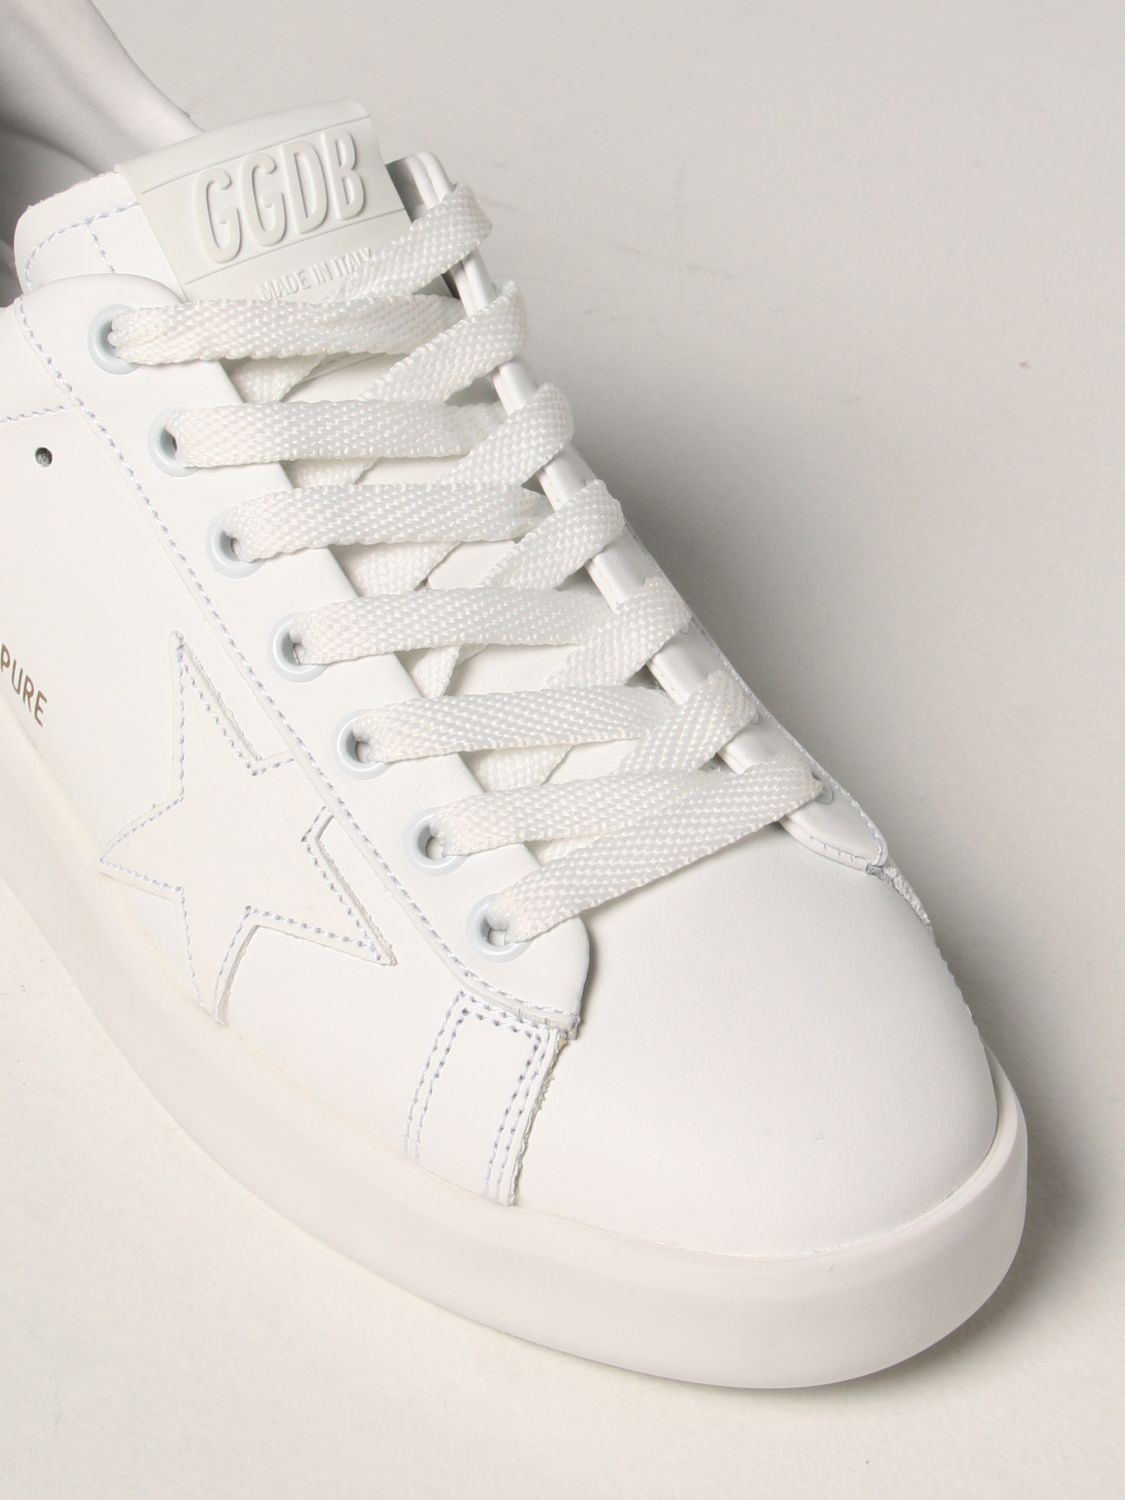 GOLDEN GOOSE: Pure New sneakers in | Sneakers Golden Goose Women White | Sneakers Golden Goose GWF00197.F002152.80185 GIGLIO.COM